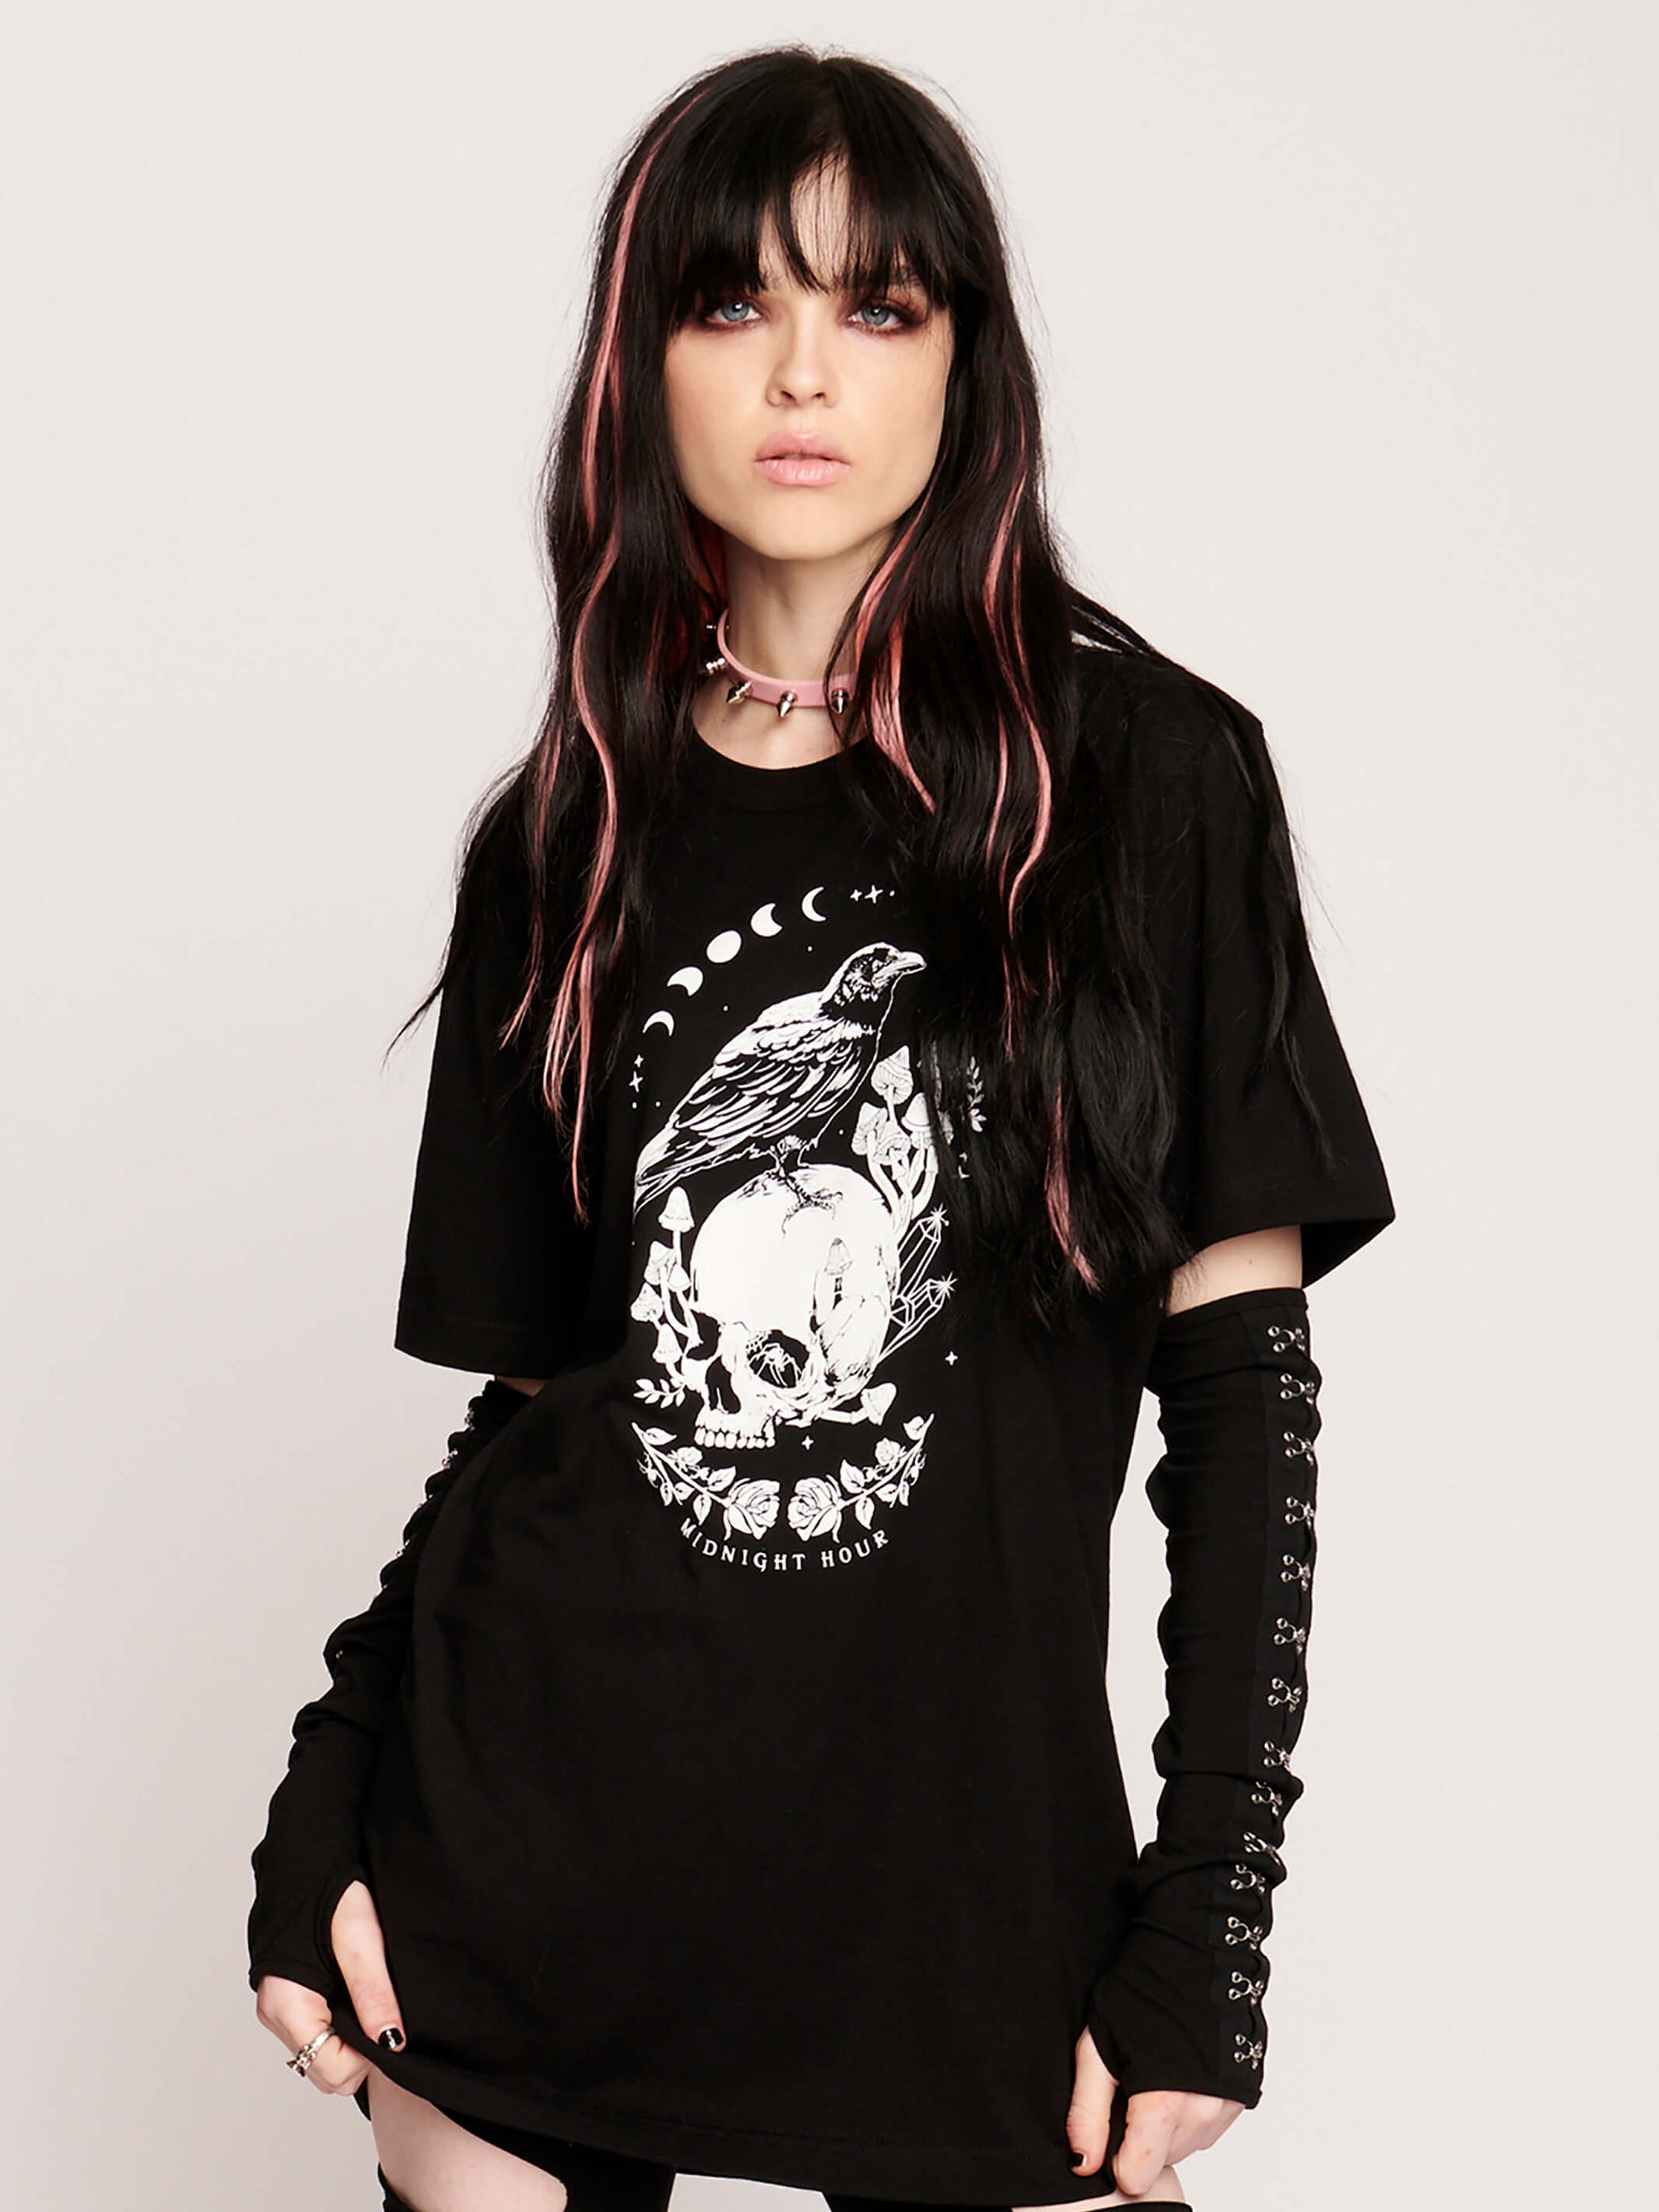 Shroomin' Crows Unisex T-Shirt goth rock fashion, skulls, mushroom, crows, moon phases. Shroomin' Crows T-shirt. Unisex t, goth girl tank. Witchy goth fashion. Goth grunge clothing, skull print, moon phase, black crow, musnrooms, witch, witchy vibes